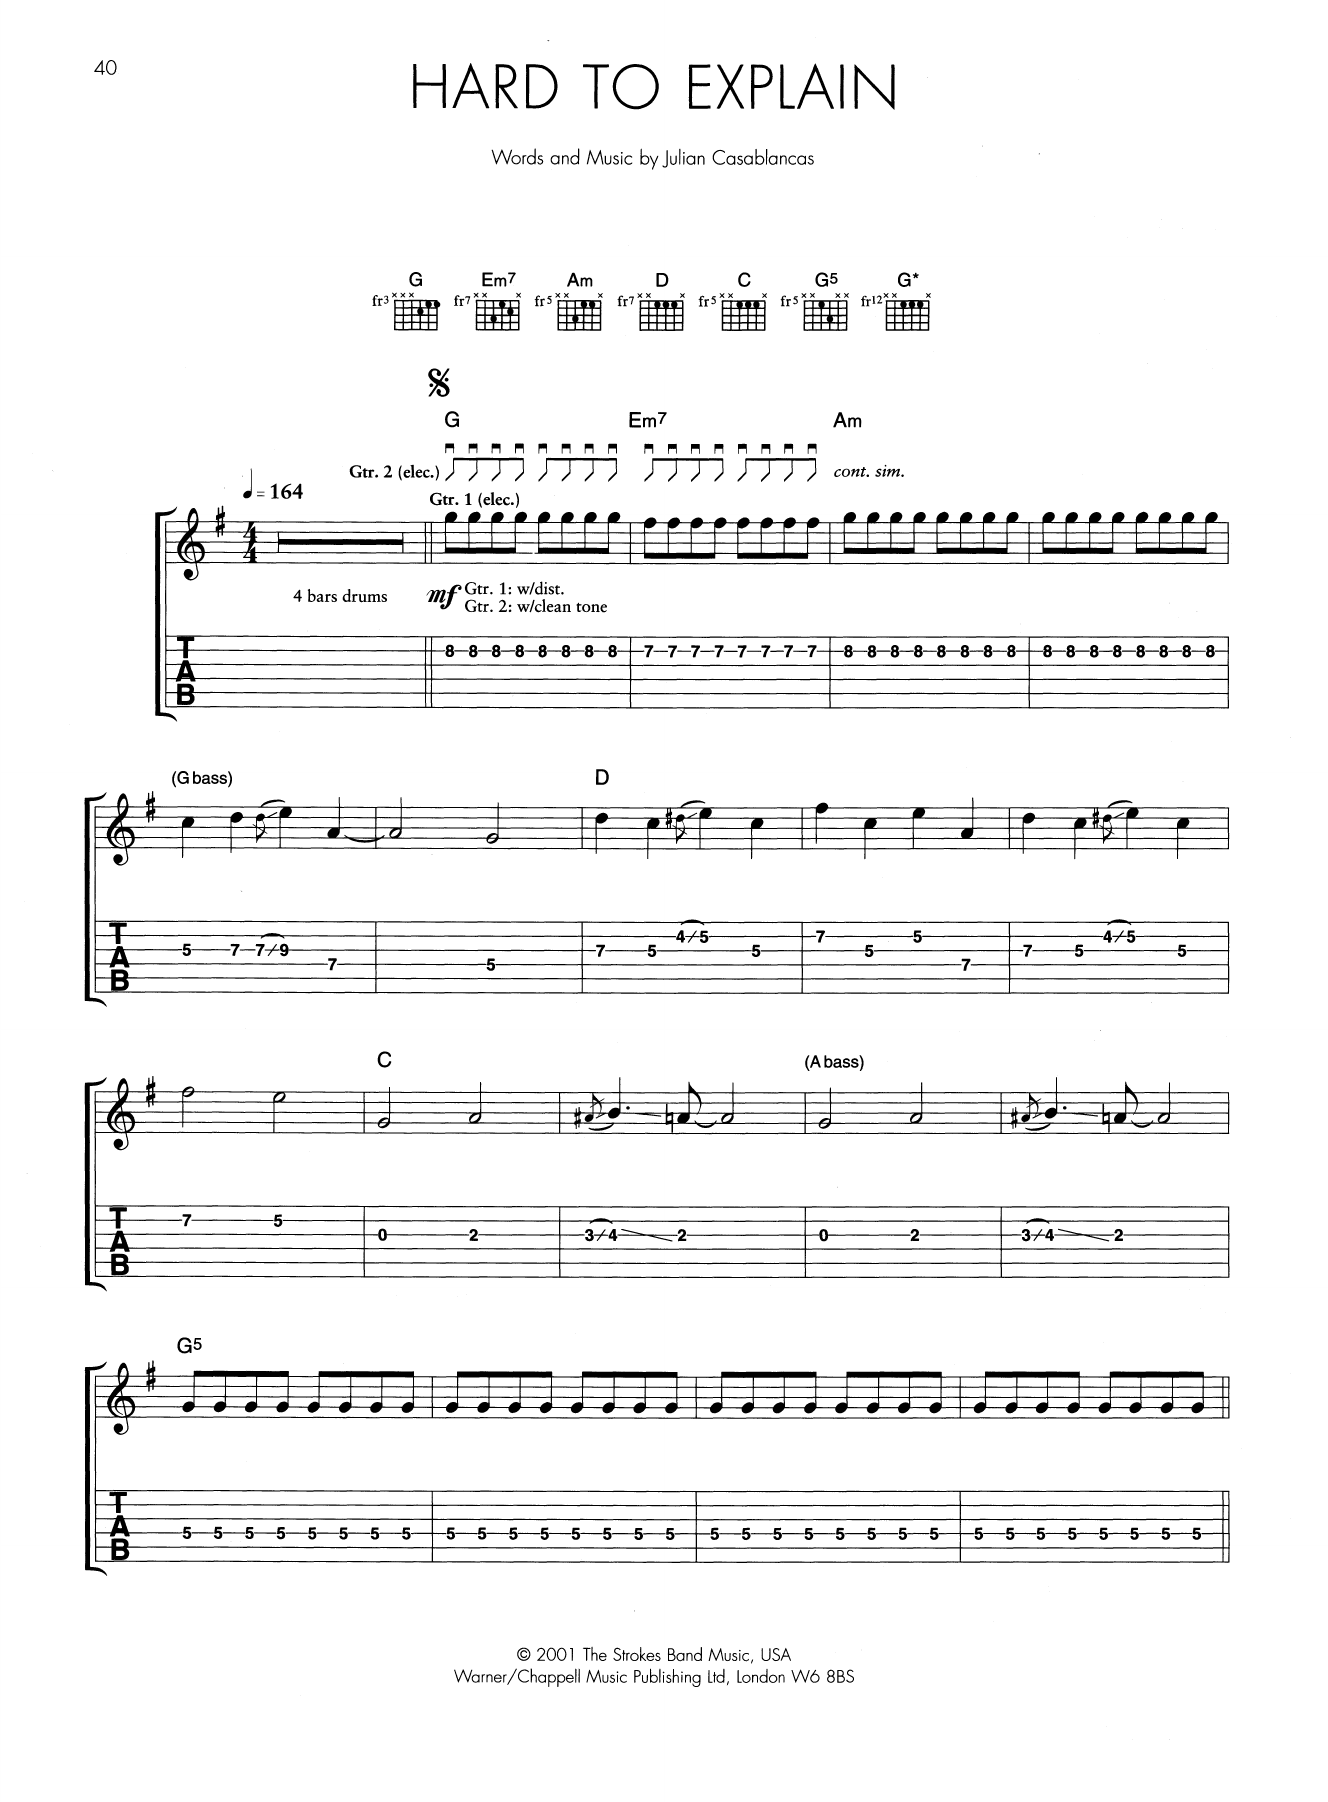 Download The Strokes Hard To Explain Sheet Music